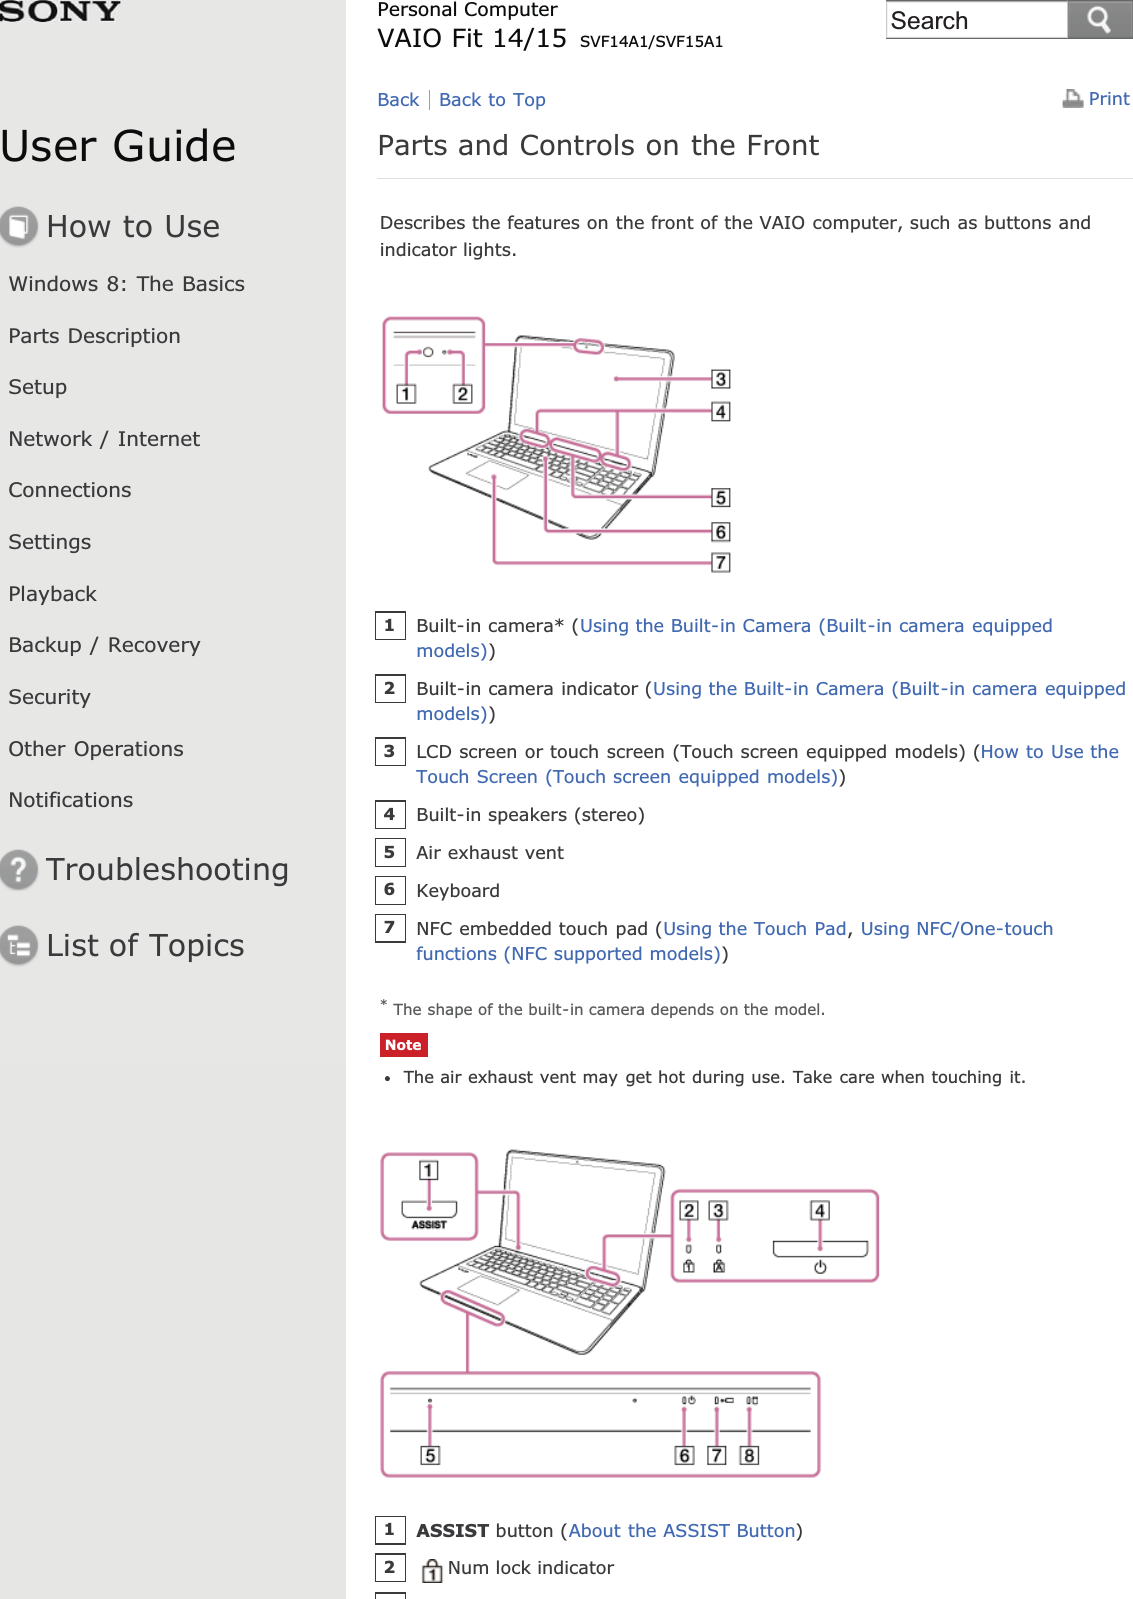 User GuideHow to UseWindows 8: The BasicsParts DescriptionSetupNetwork / InternetConnectionsSettingsPlaybackBackup / RecoverySecurityOther OperationsNotificationsTroubleshootingList of TopicsPrintPersonal ComputerVAIO Fit 14/15 SVF14A1/SVF15A1Parts and Controls on the FrontDescribes the features on the front of the VAIO computer, such as buttons andindicator lights.* The shape of the built-in camera depends on the model.NoteThe air exhaust vent may get hot during use. Take care when touching it.Back Back to TopBuilt-in camera* (Using the Built-in Camera (Built-in camera equippedmodels))1Built-in camera indicator (Using the Built-in Camera (Built-in camera equippedmodels))2LCD screen or touch screen (Touch screen equipped models) (How to Use theTouch Screen (Touch screen equipped models))3Built-in speakers (stereo)4Air exhaust vent5Keyboard6NFC embedded touch pad (Using the Touch Pad,Using NFC/One-touchfunctions (NFC supported models))7ASSIST button (About the ASSIST Button)1Num lock indicator2Search